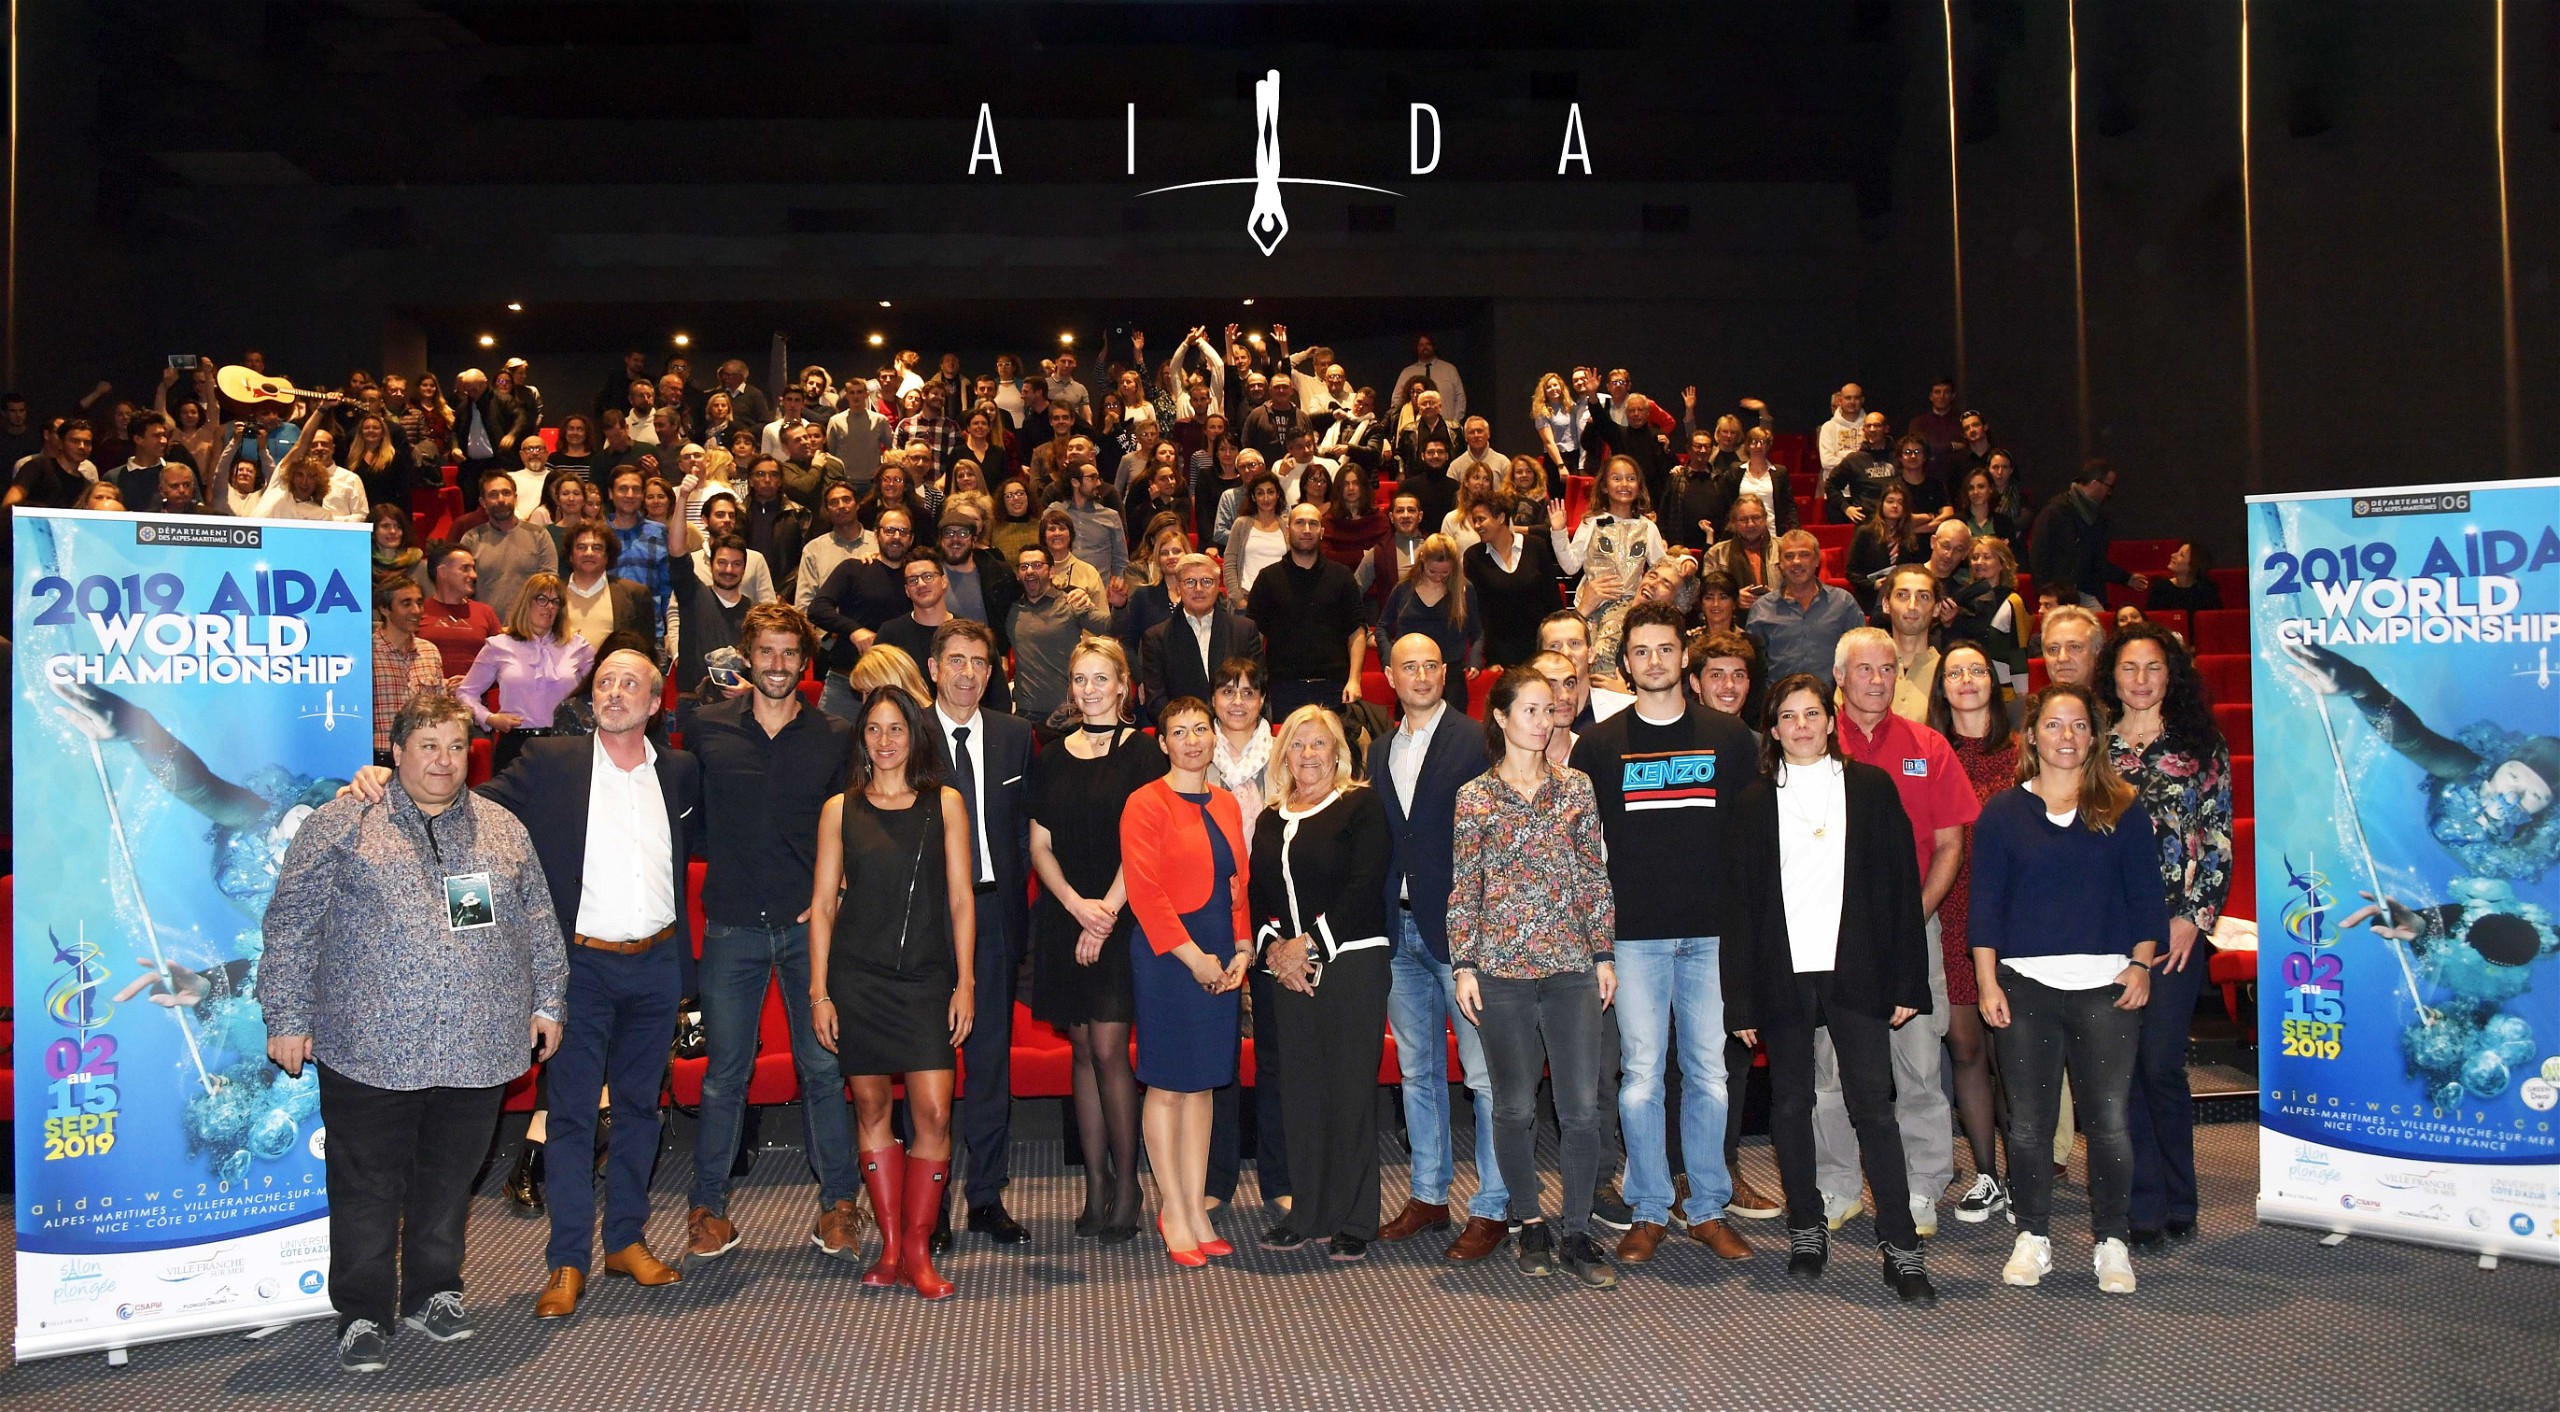 The launch event for the 2019 AIDA World Championships was attended by 300 people.